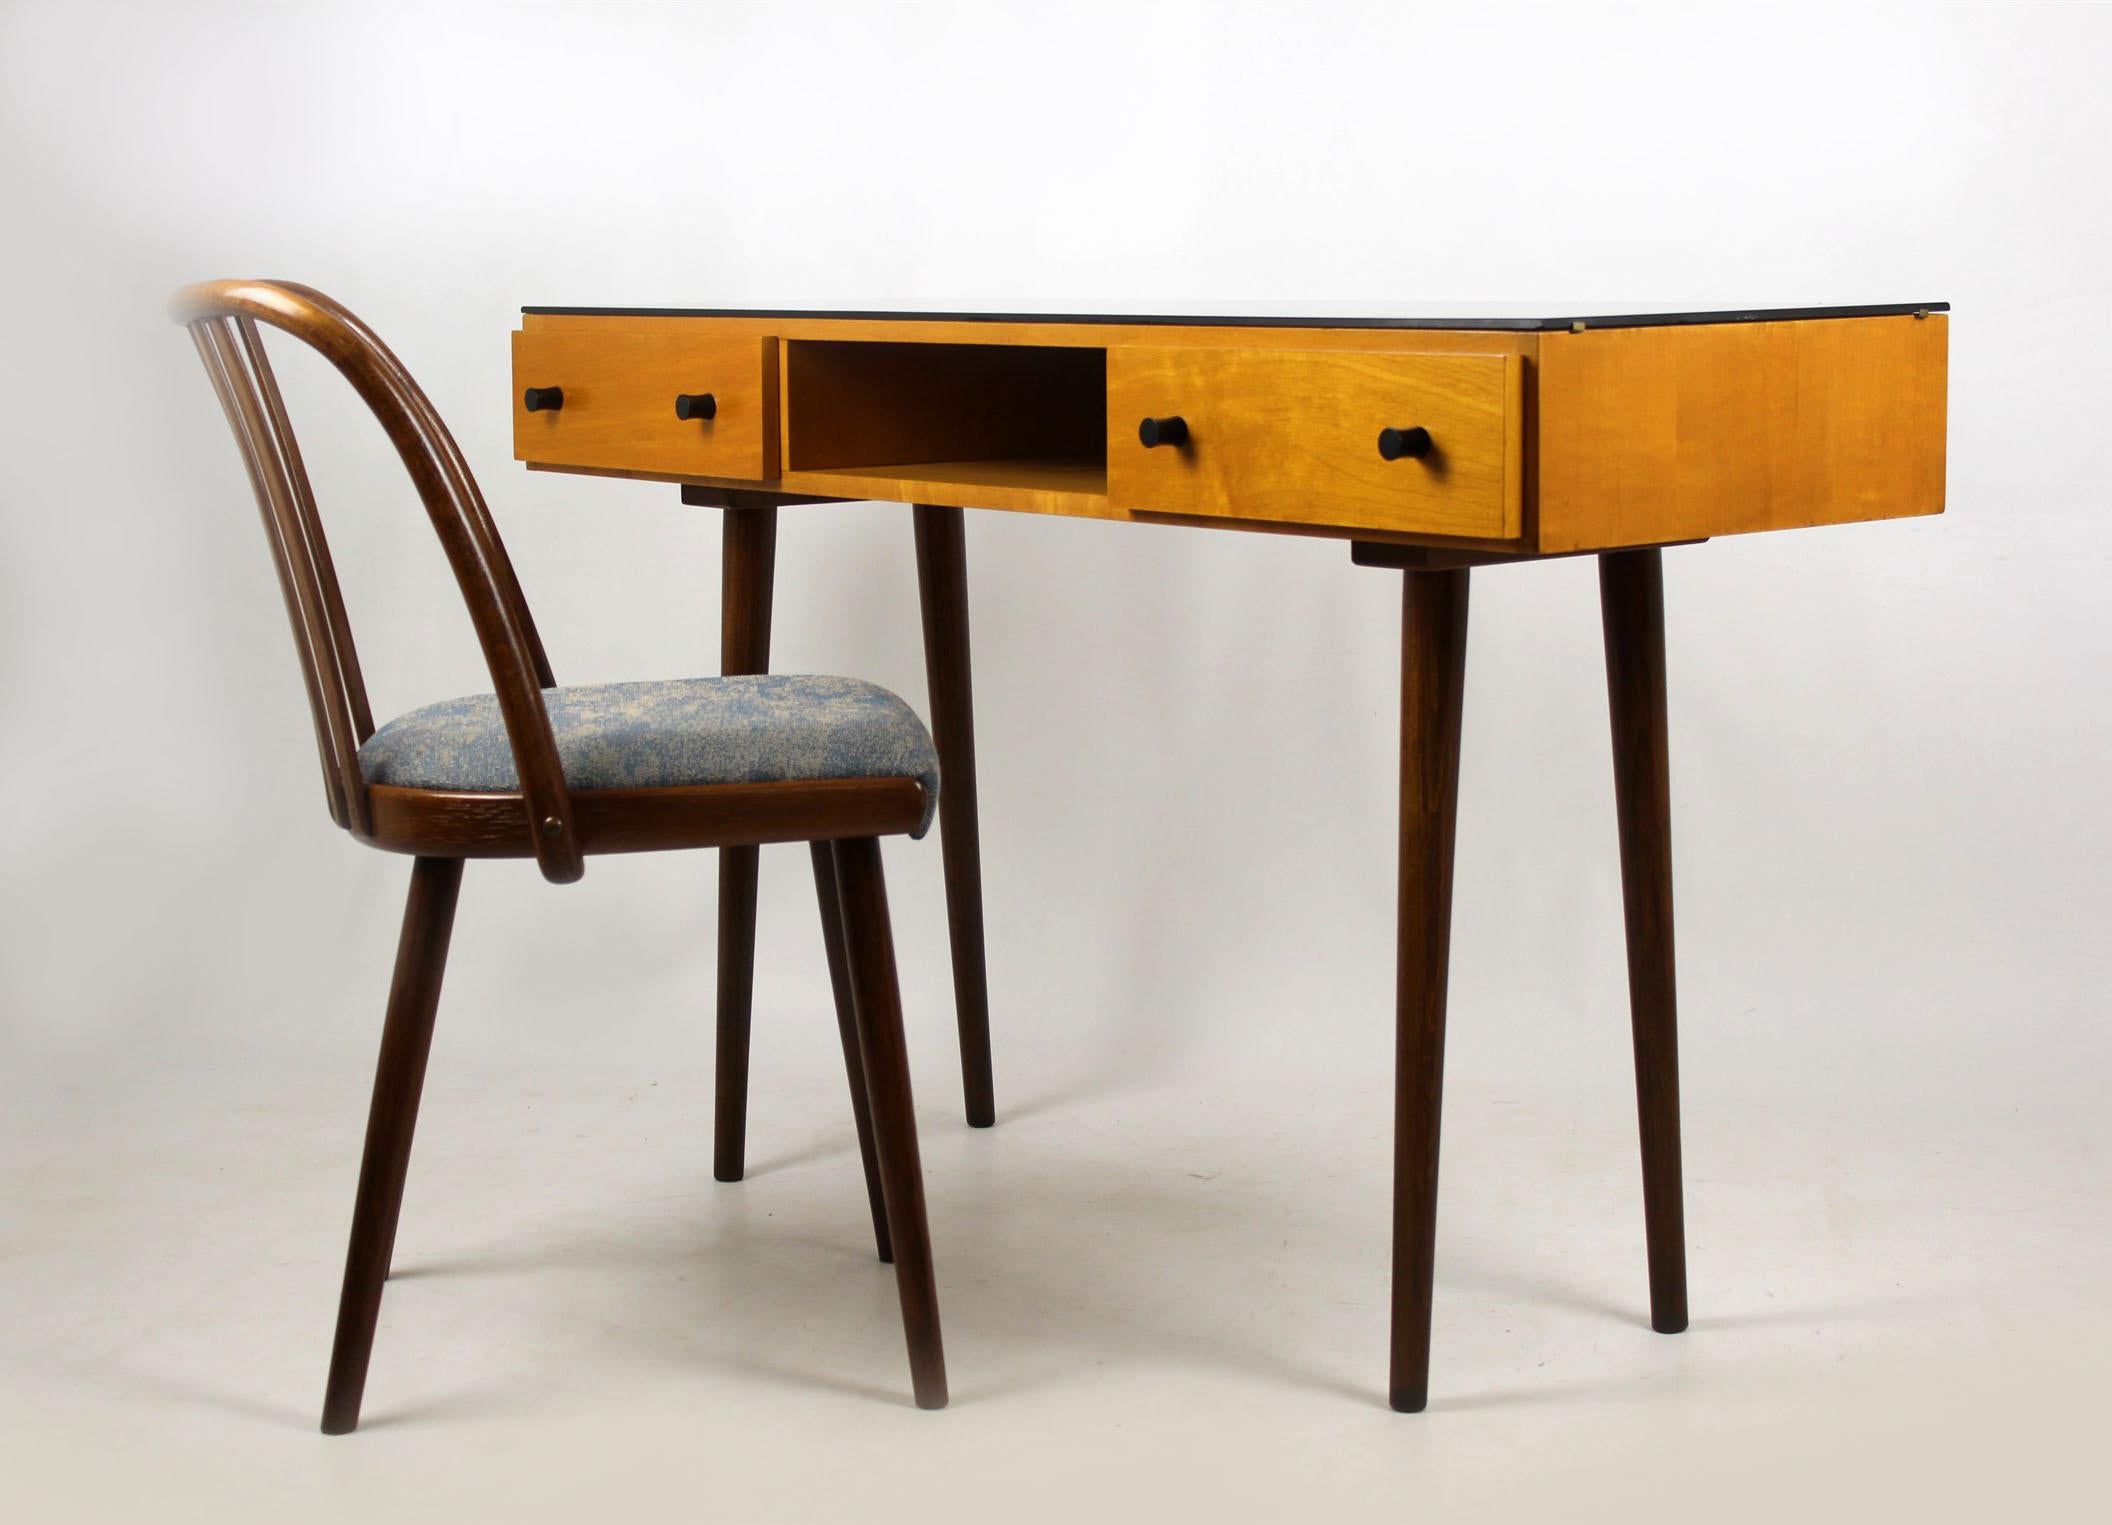 Czech Midcentury Desk or Console Table by M. Požár for Up Bučovice, 1960s